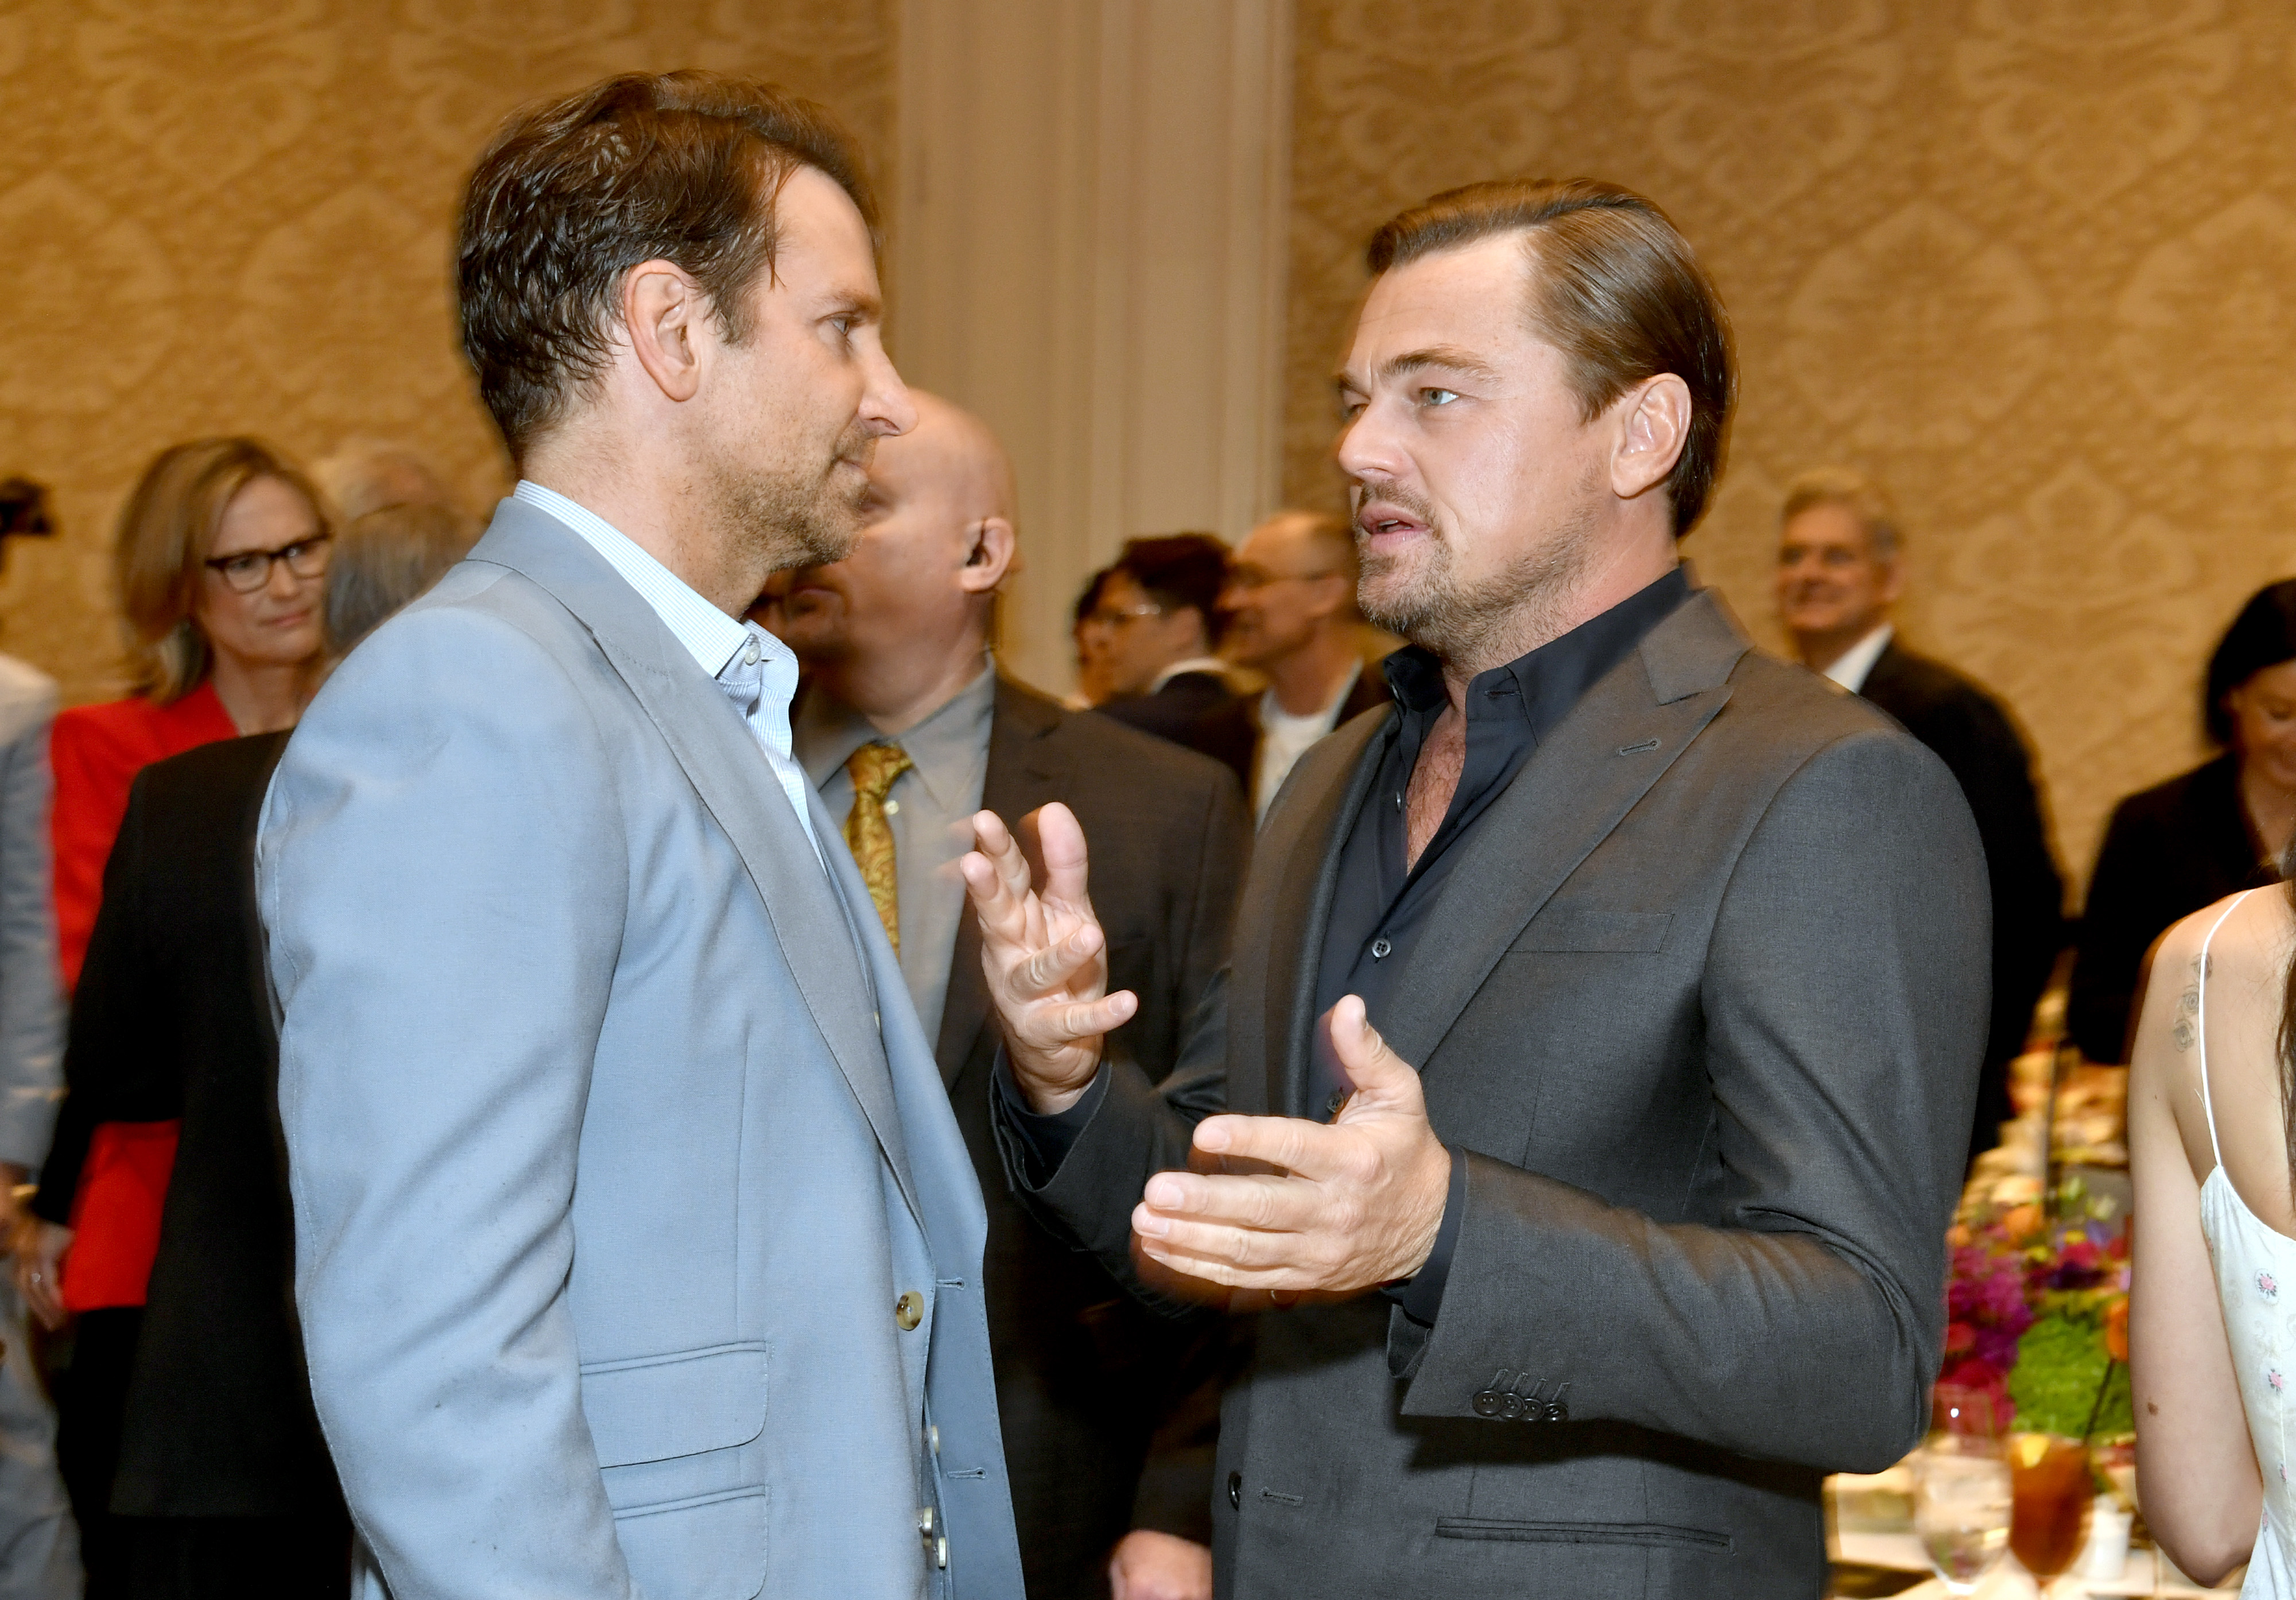 Bradley Cooper and Leonardo DiCaprio at the 20th Annual AFI Awards in Los Angeles, California on January 03, 2020 | Source: Getty Images